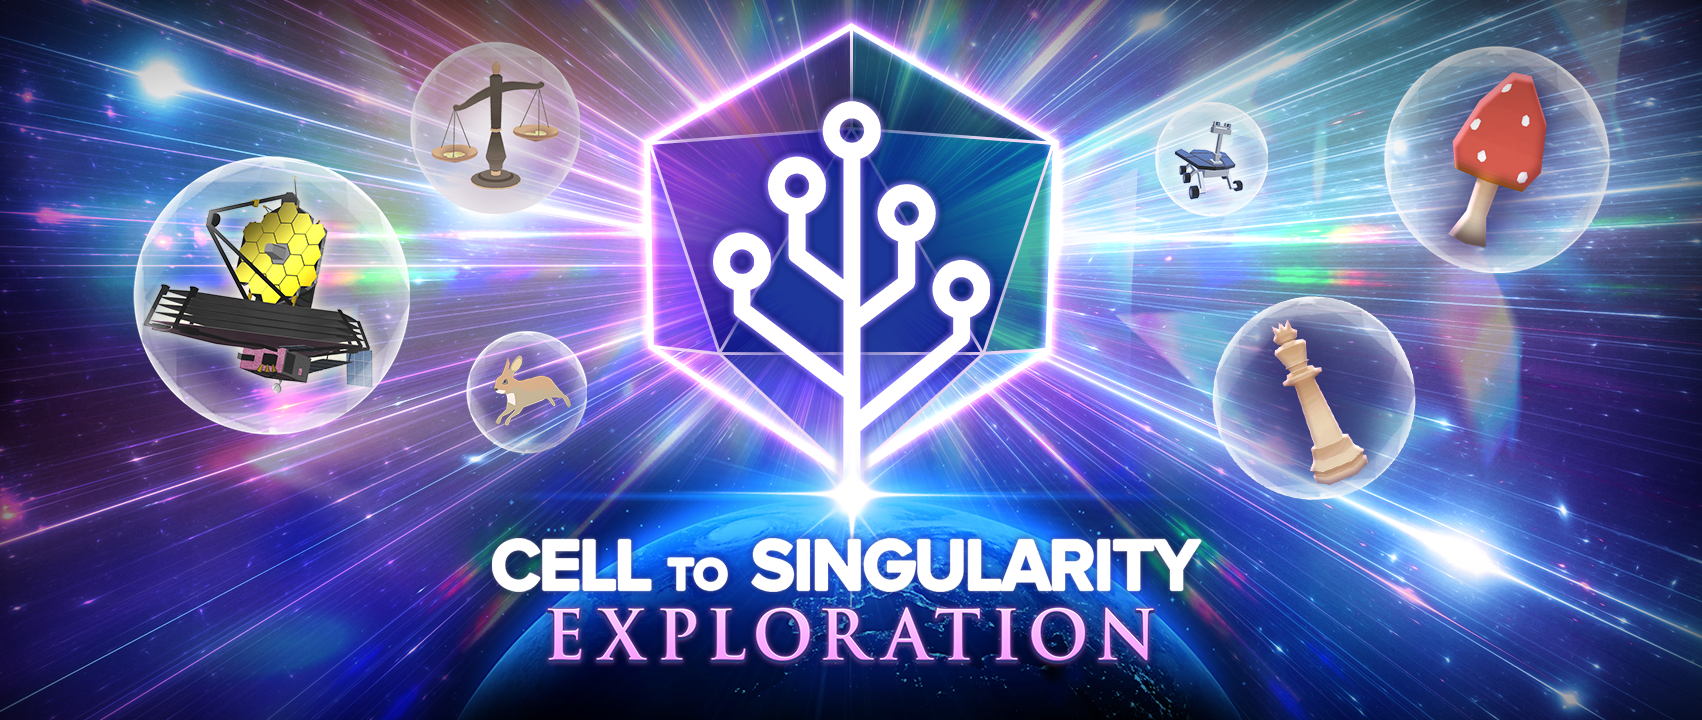 Steam cell to singularity фото 11